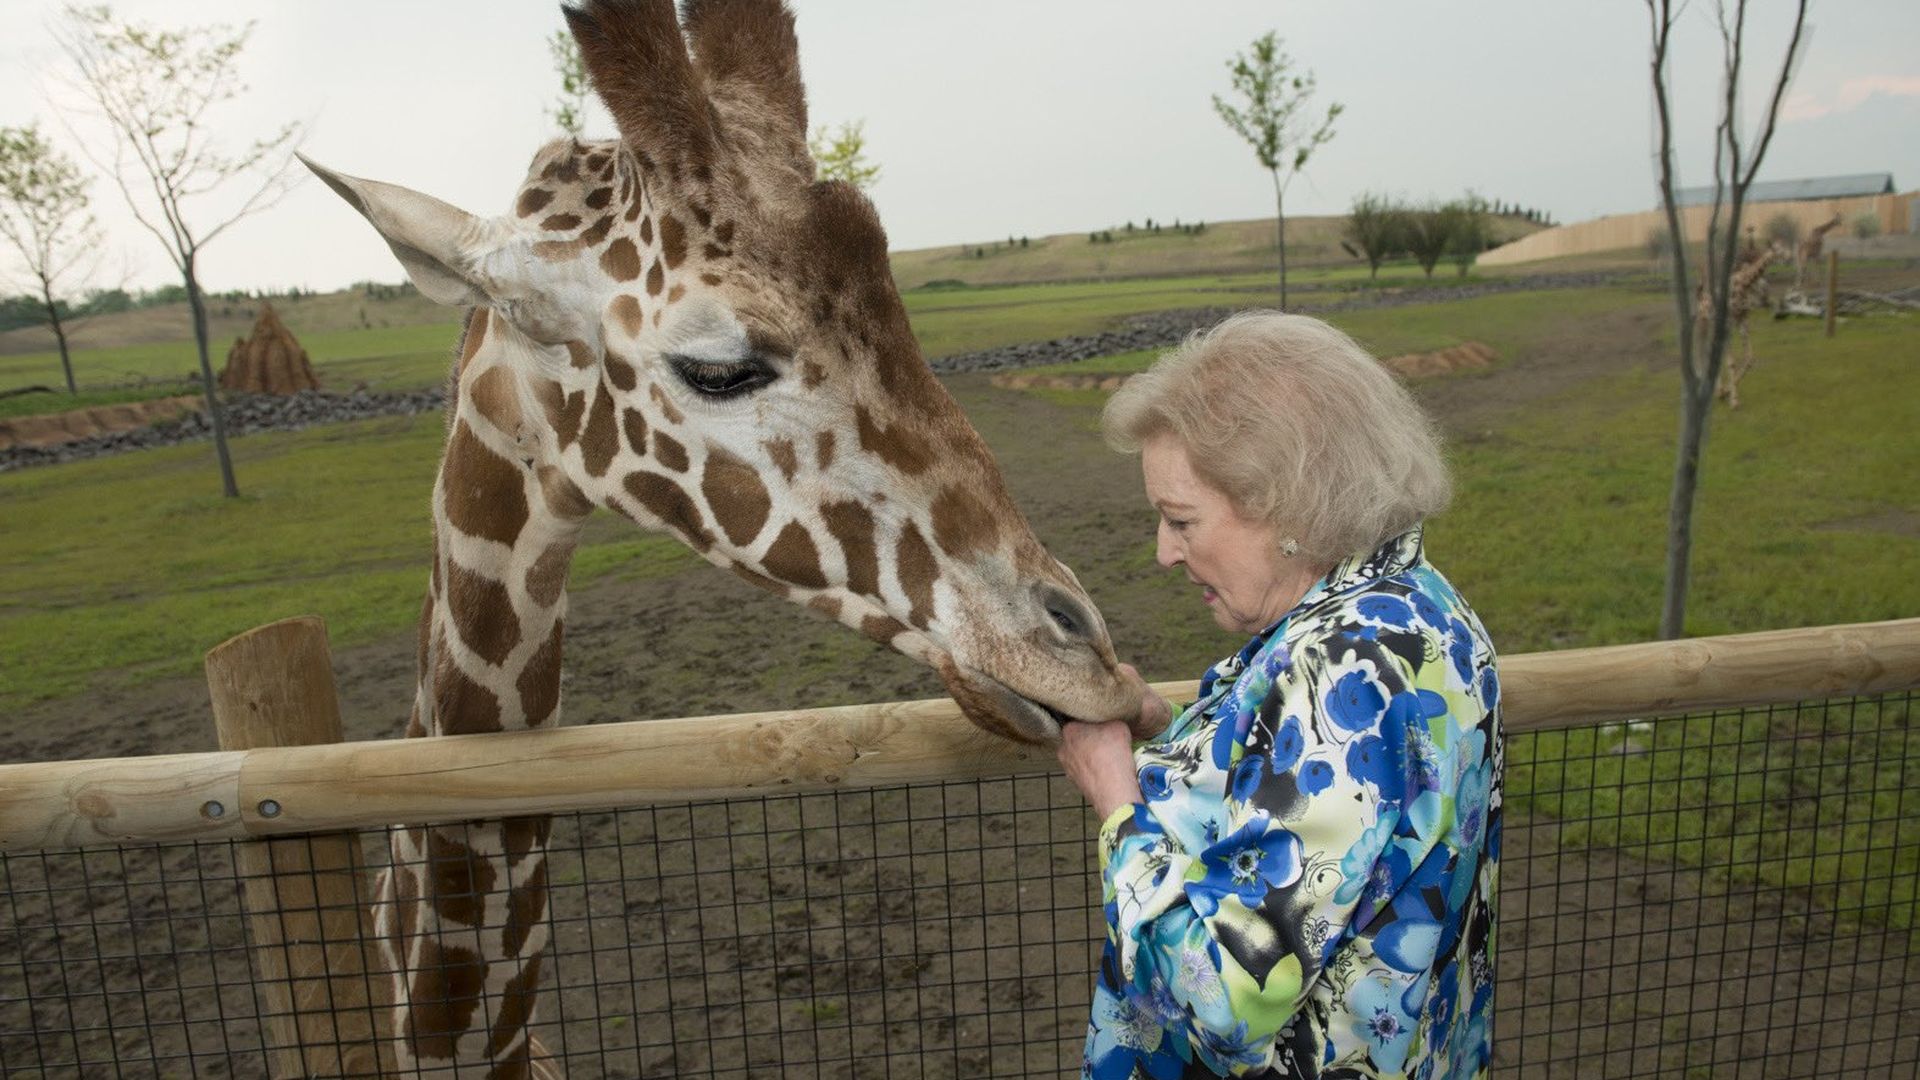 Betty White receives a kiss on her hand from a giraffe, whose head is leaning over a fence